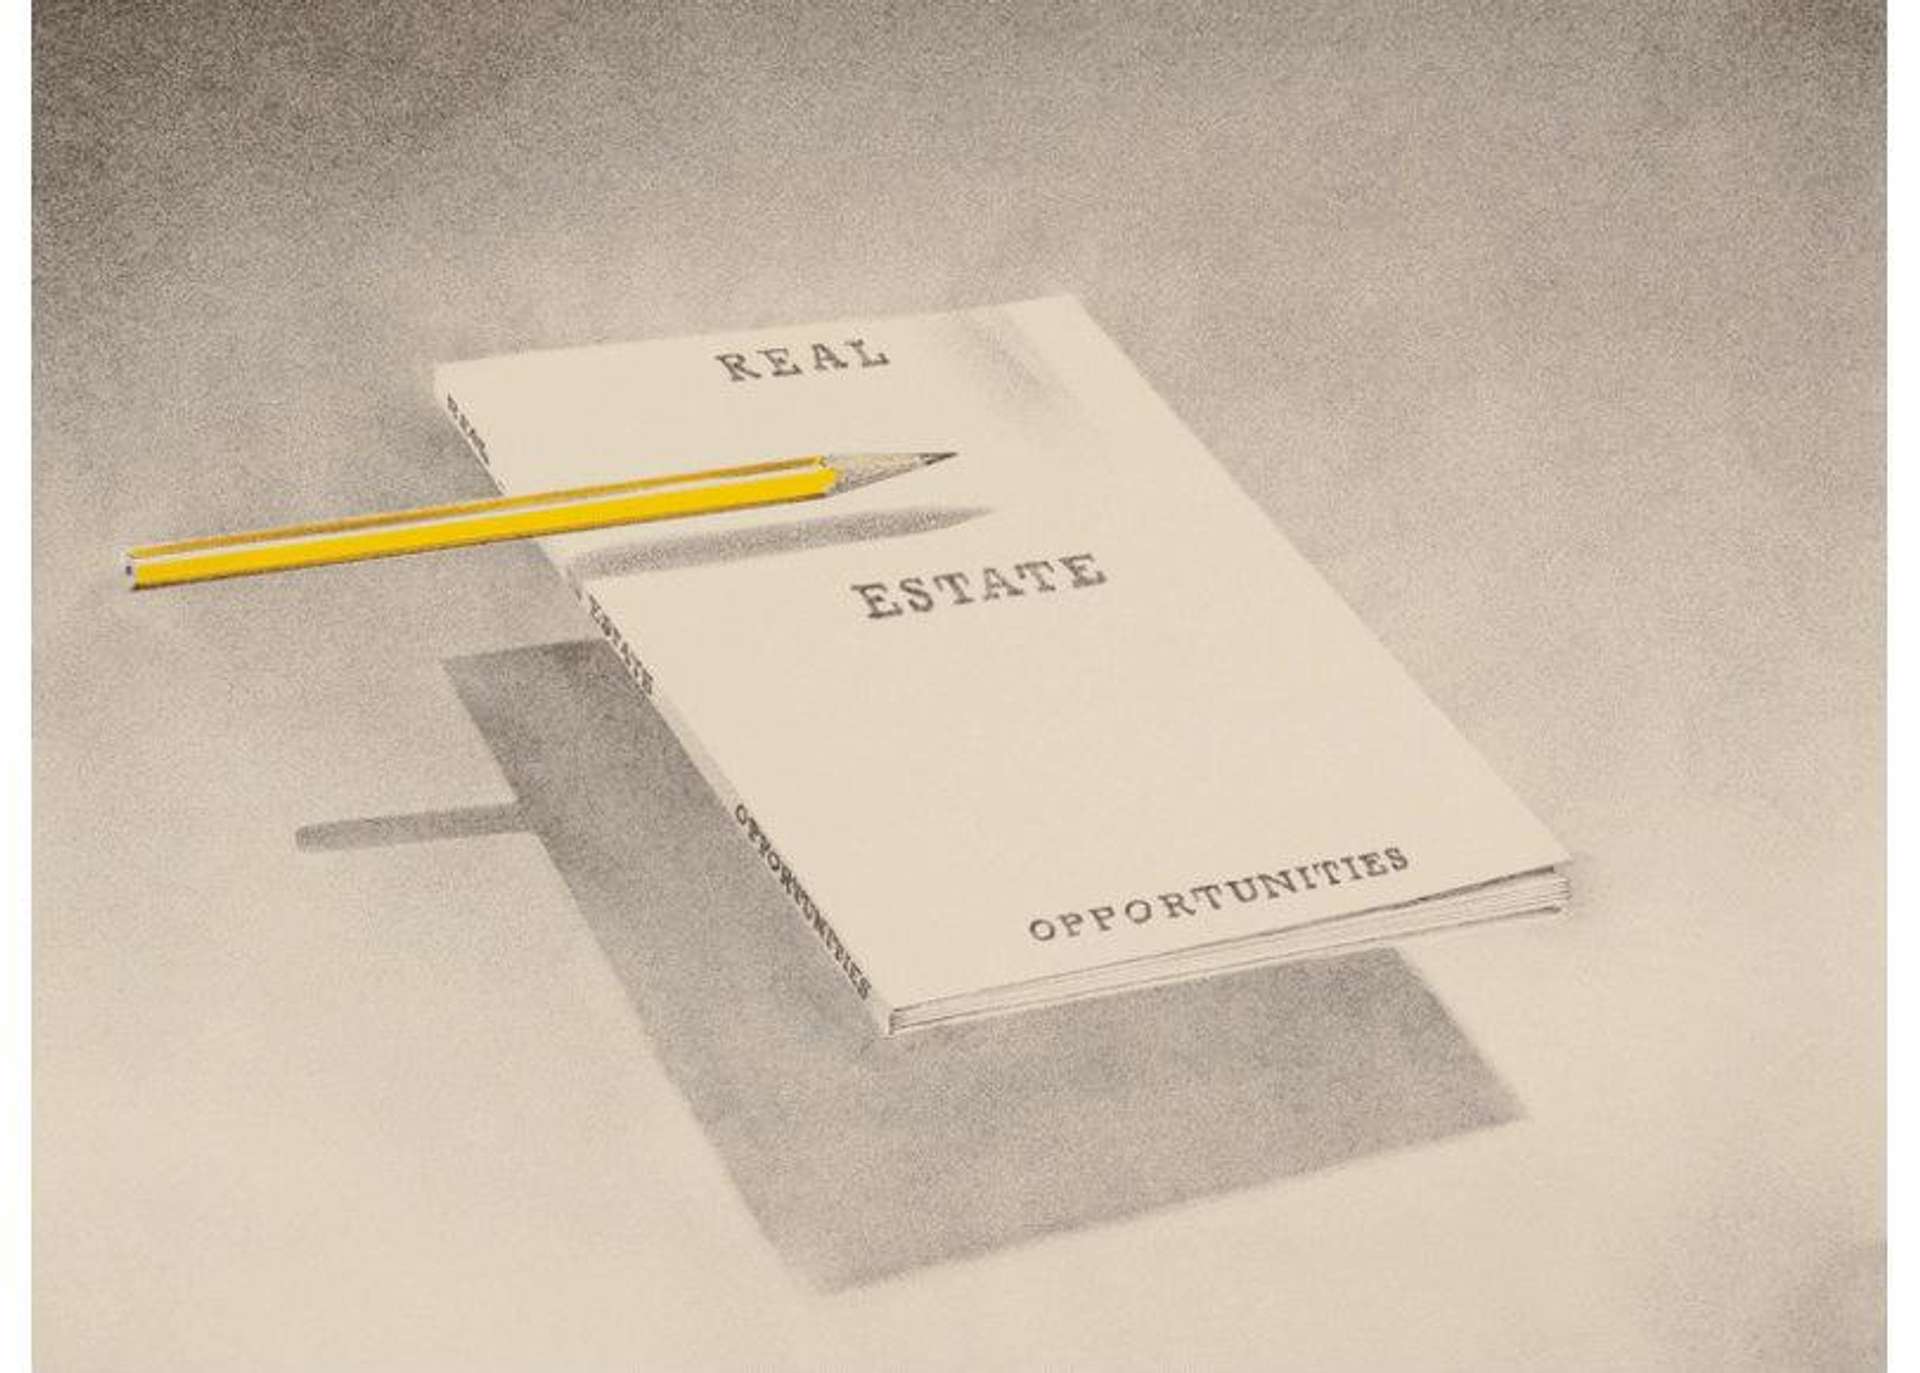 Real Estate Opportunities, Book Cover - Signed Print by Ed Ruscha 1970 - MyArtBroker